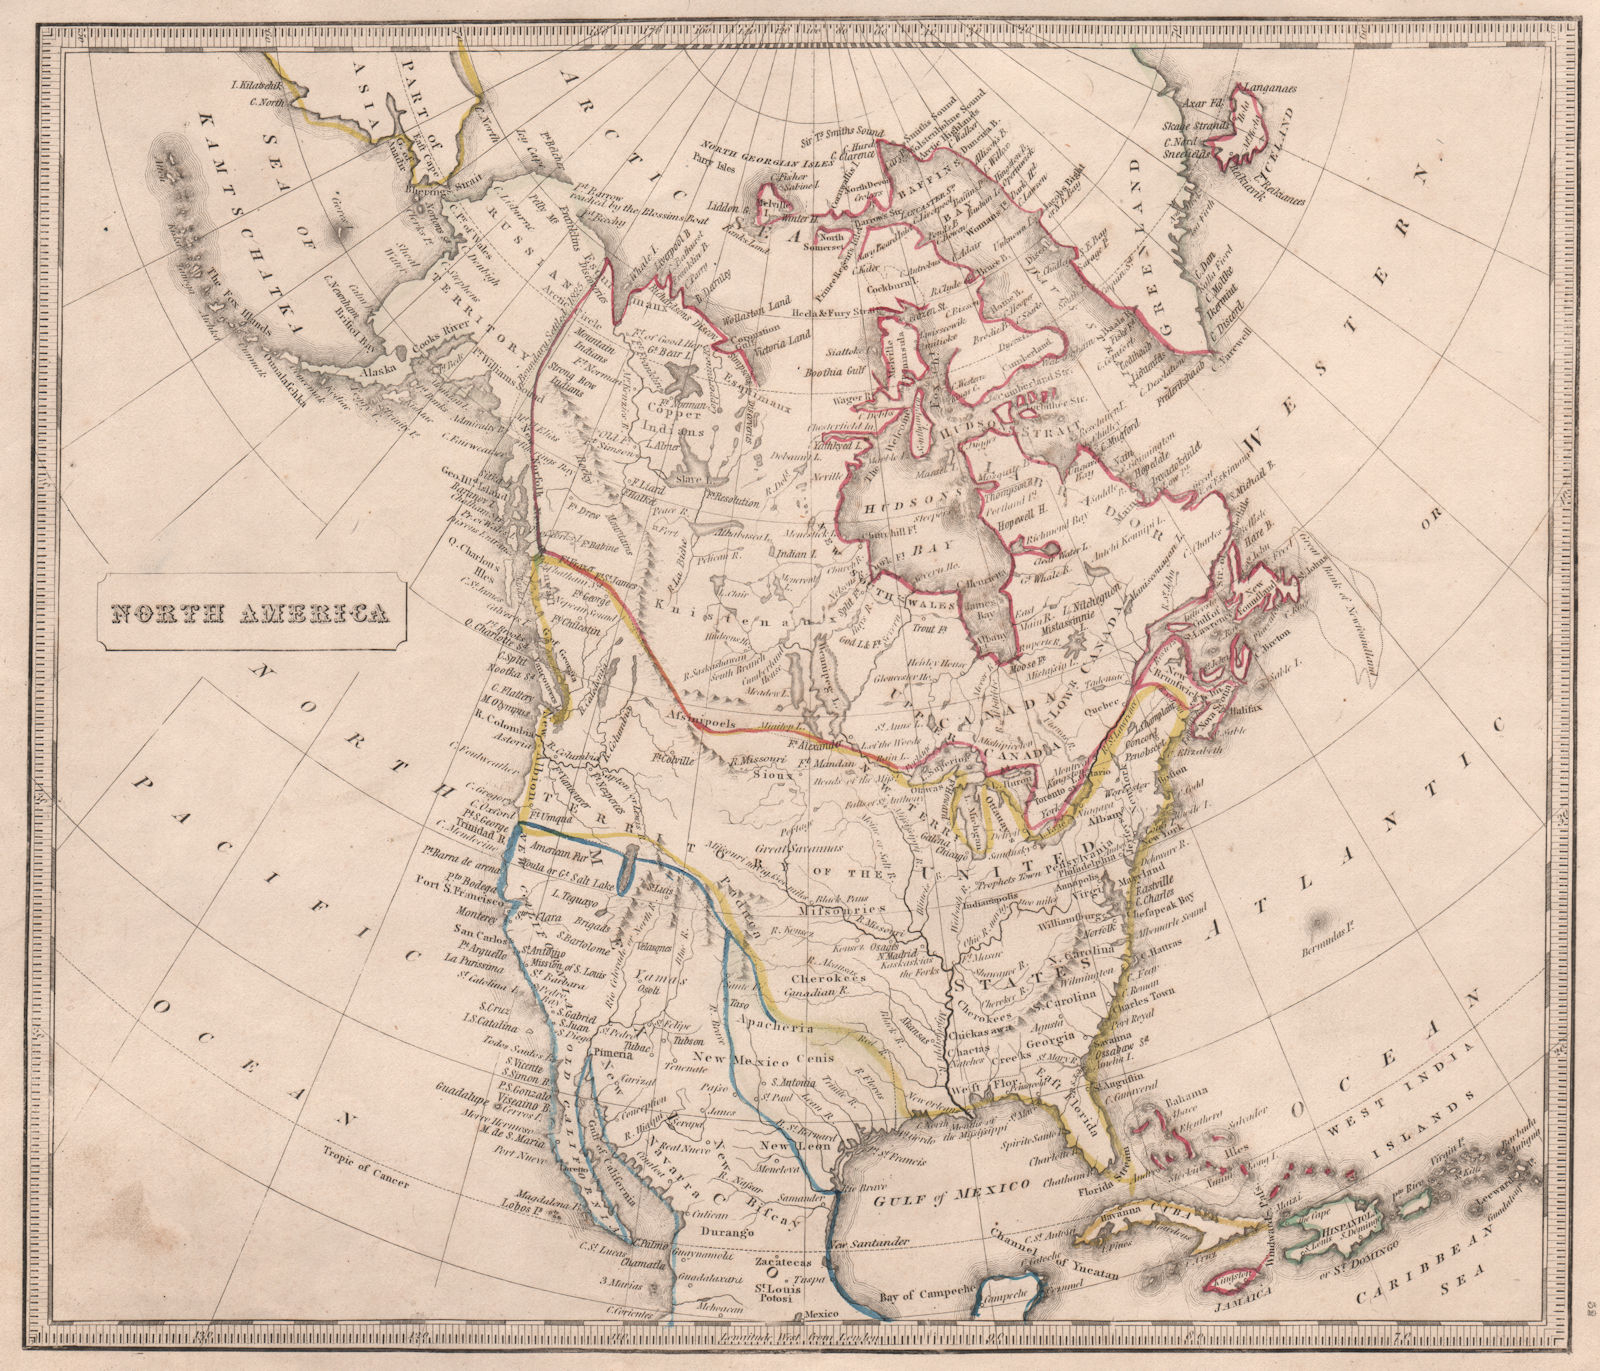 NORTH AMERICA showing Texas Republic & Western USA as Mexican. JOHNSON 1850 map